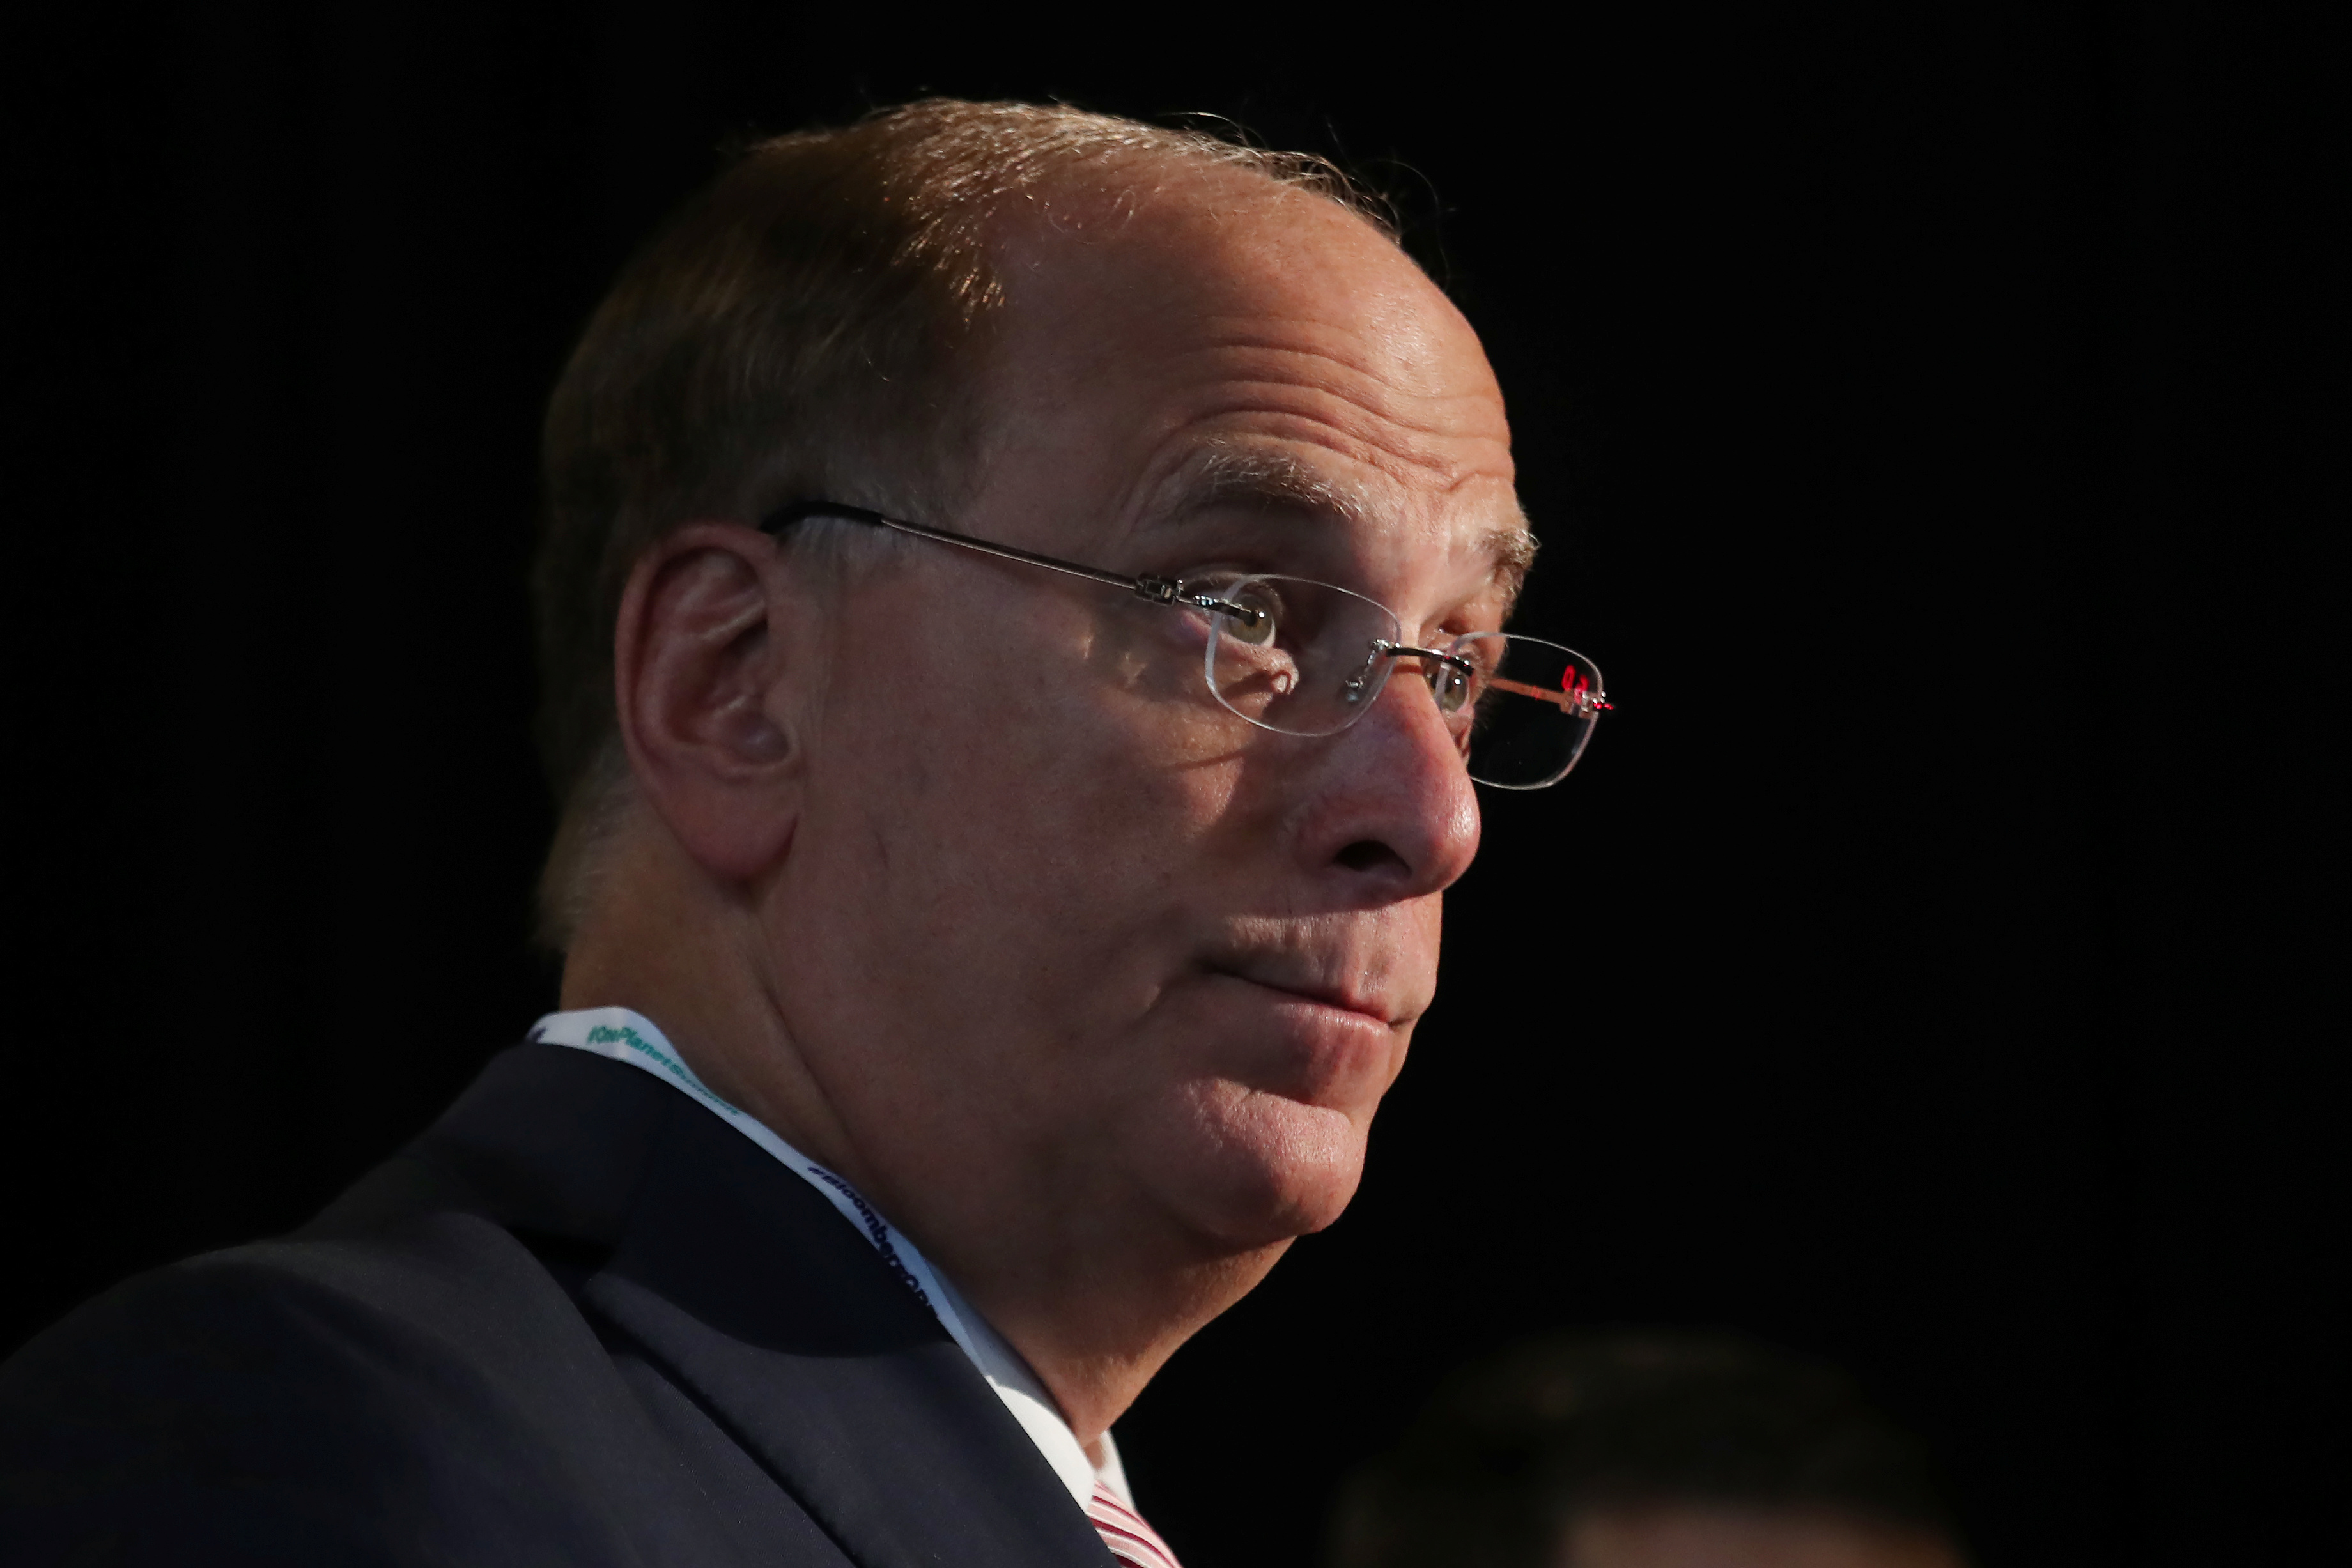 Larry Fink, Chief Executive Officer of BlackRock, stands at the Bloomberg Global Business forum in New York